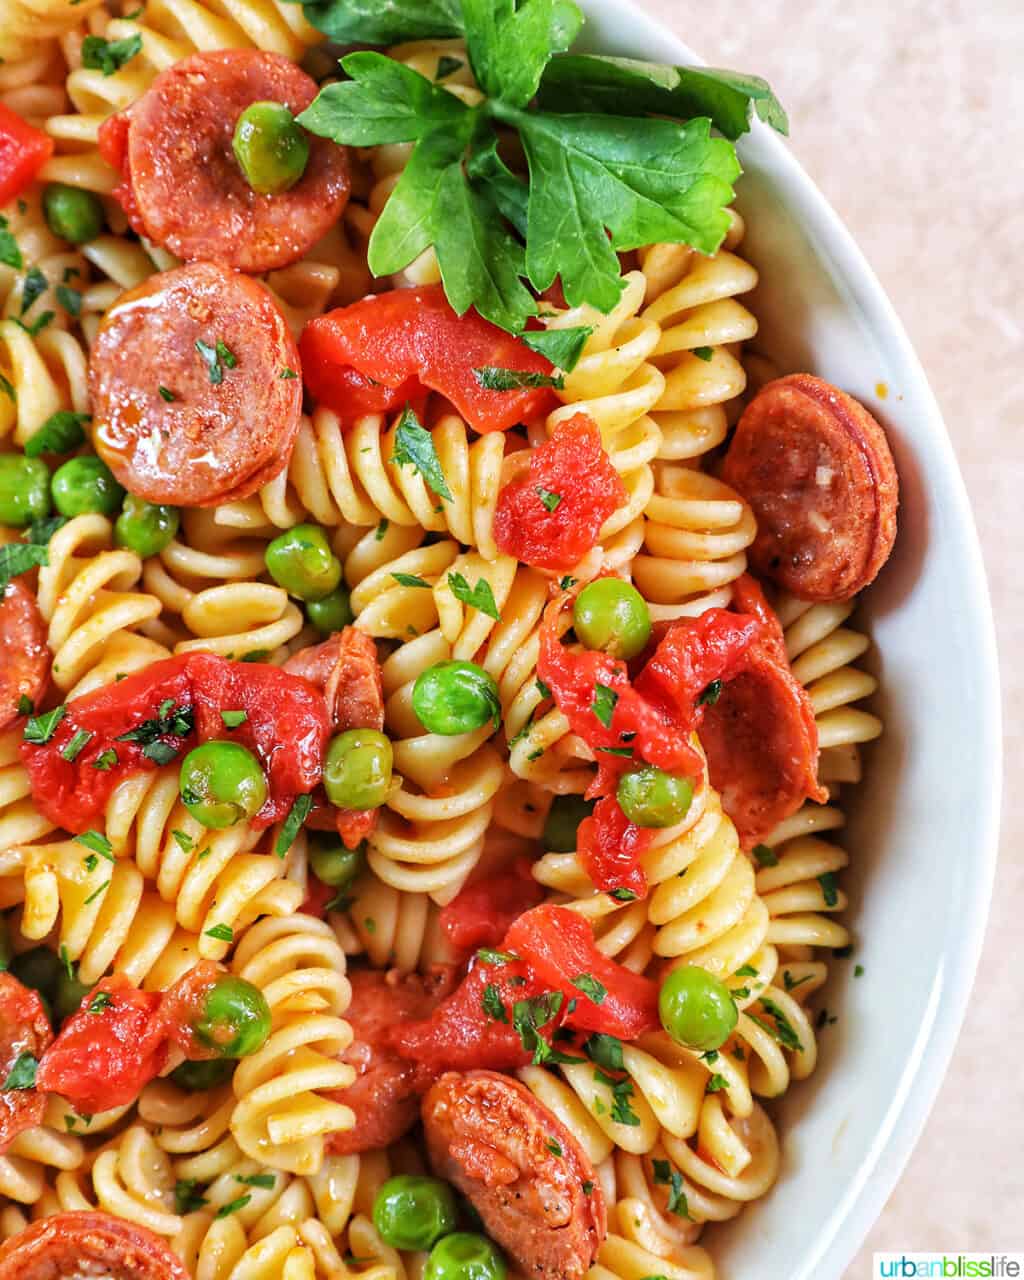 half a bowl of linguica pasta with tomatoes, herbs, peas, and linguica.